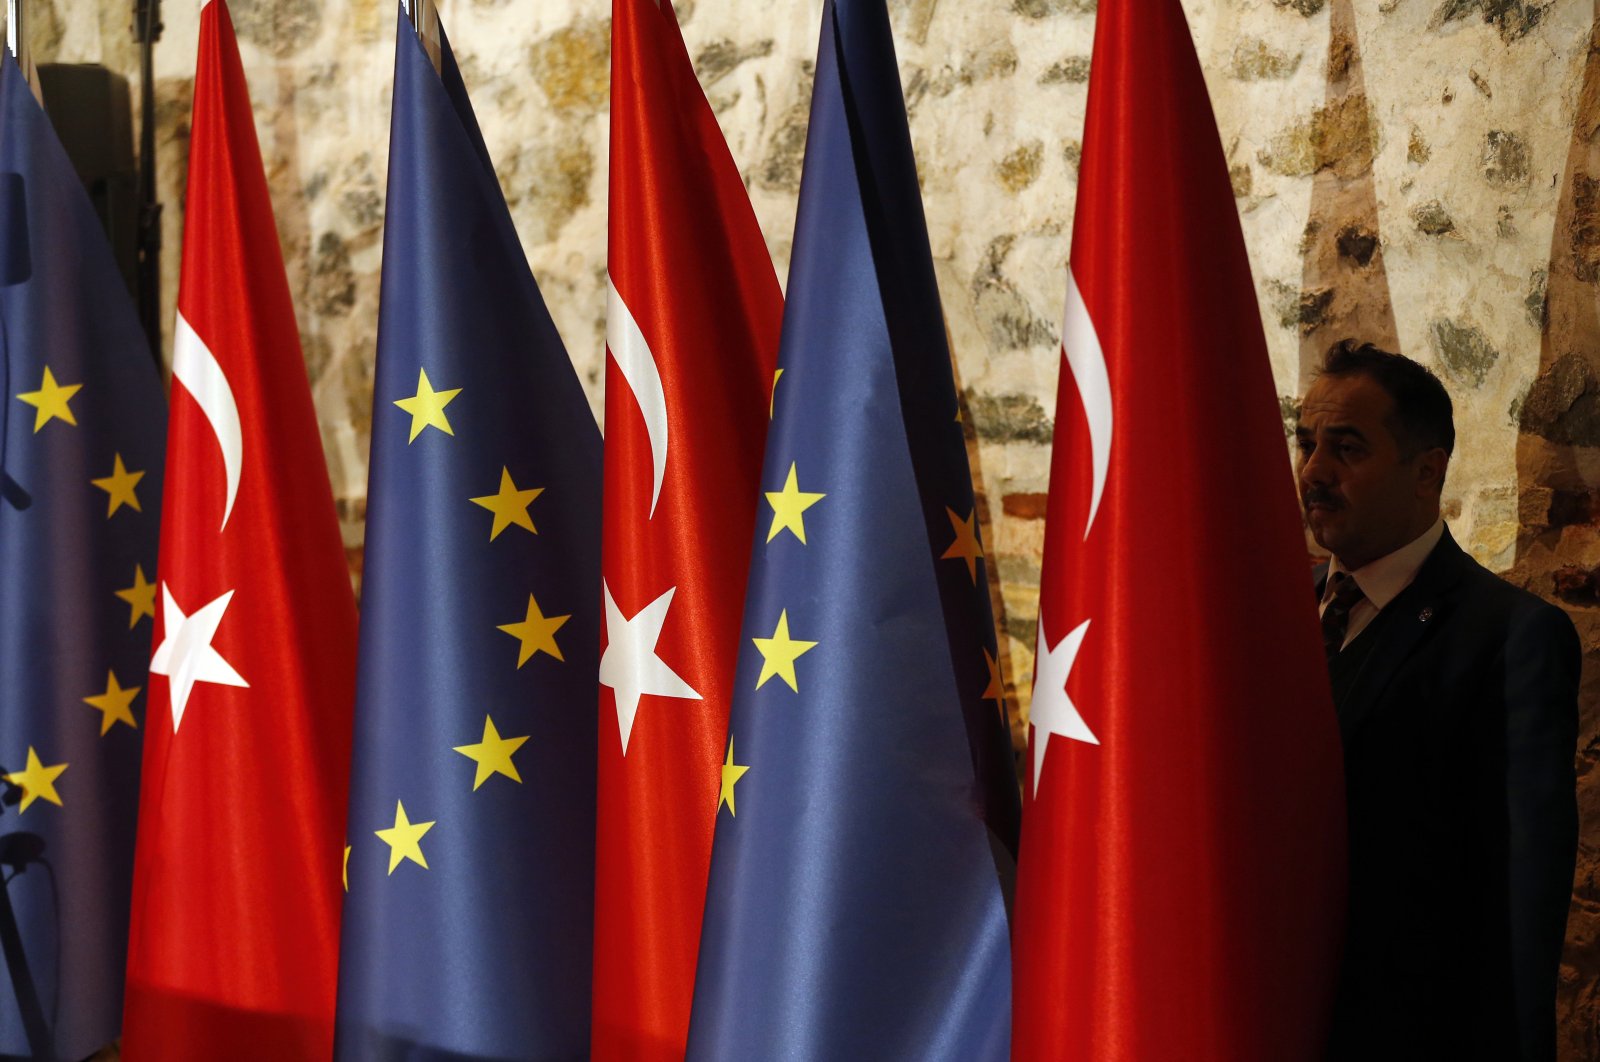 An official adjusts Turkey's and European Union's flags prior to the opening session of a high-level meeting in Istanbul, Feb. 28, 2019. (AP Photo)